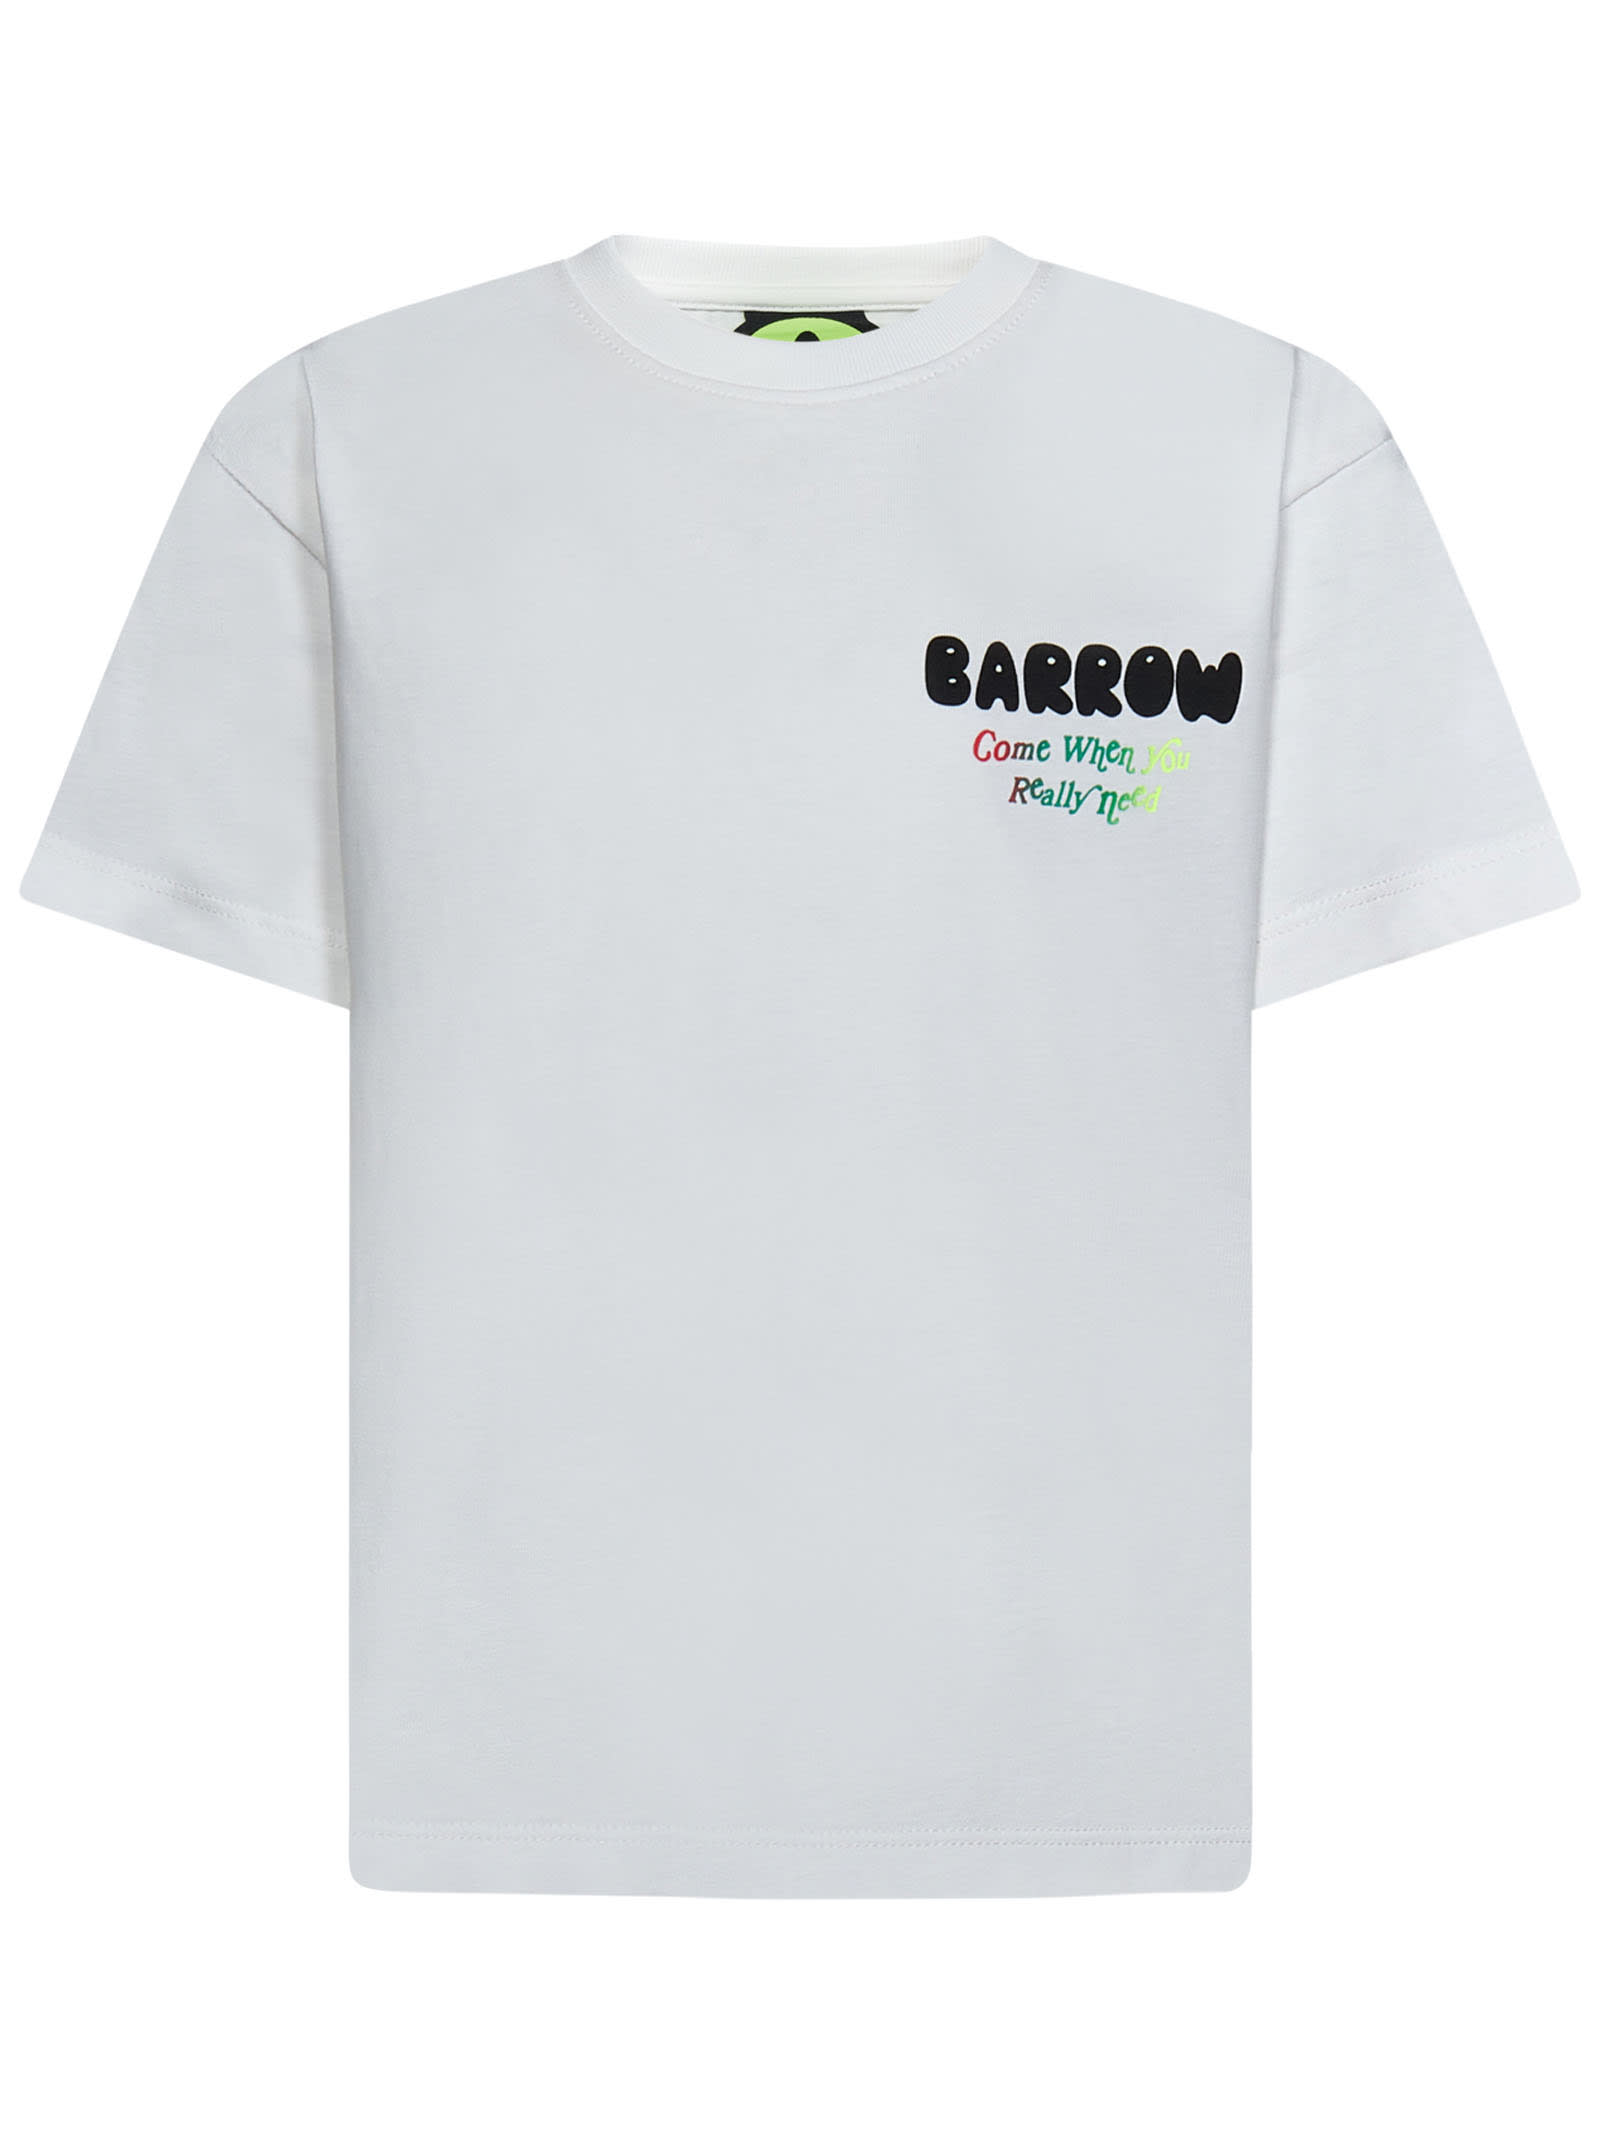 Barrow Kids' T-shirt In Off White